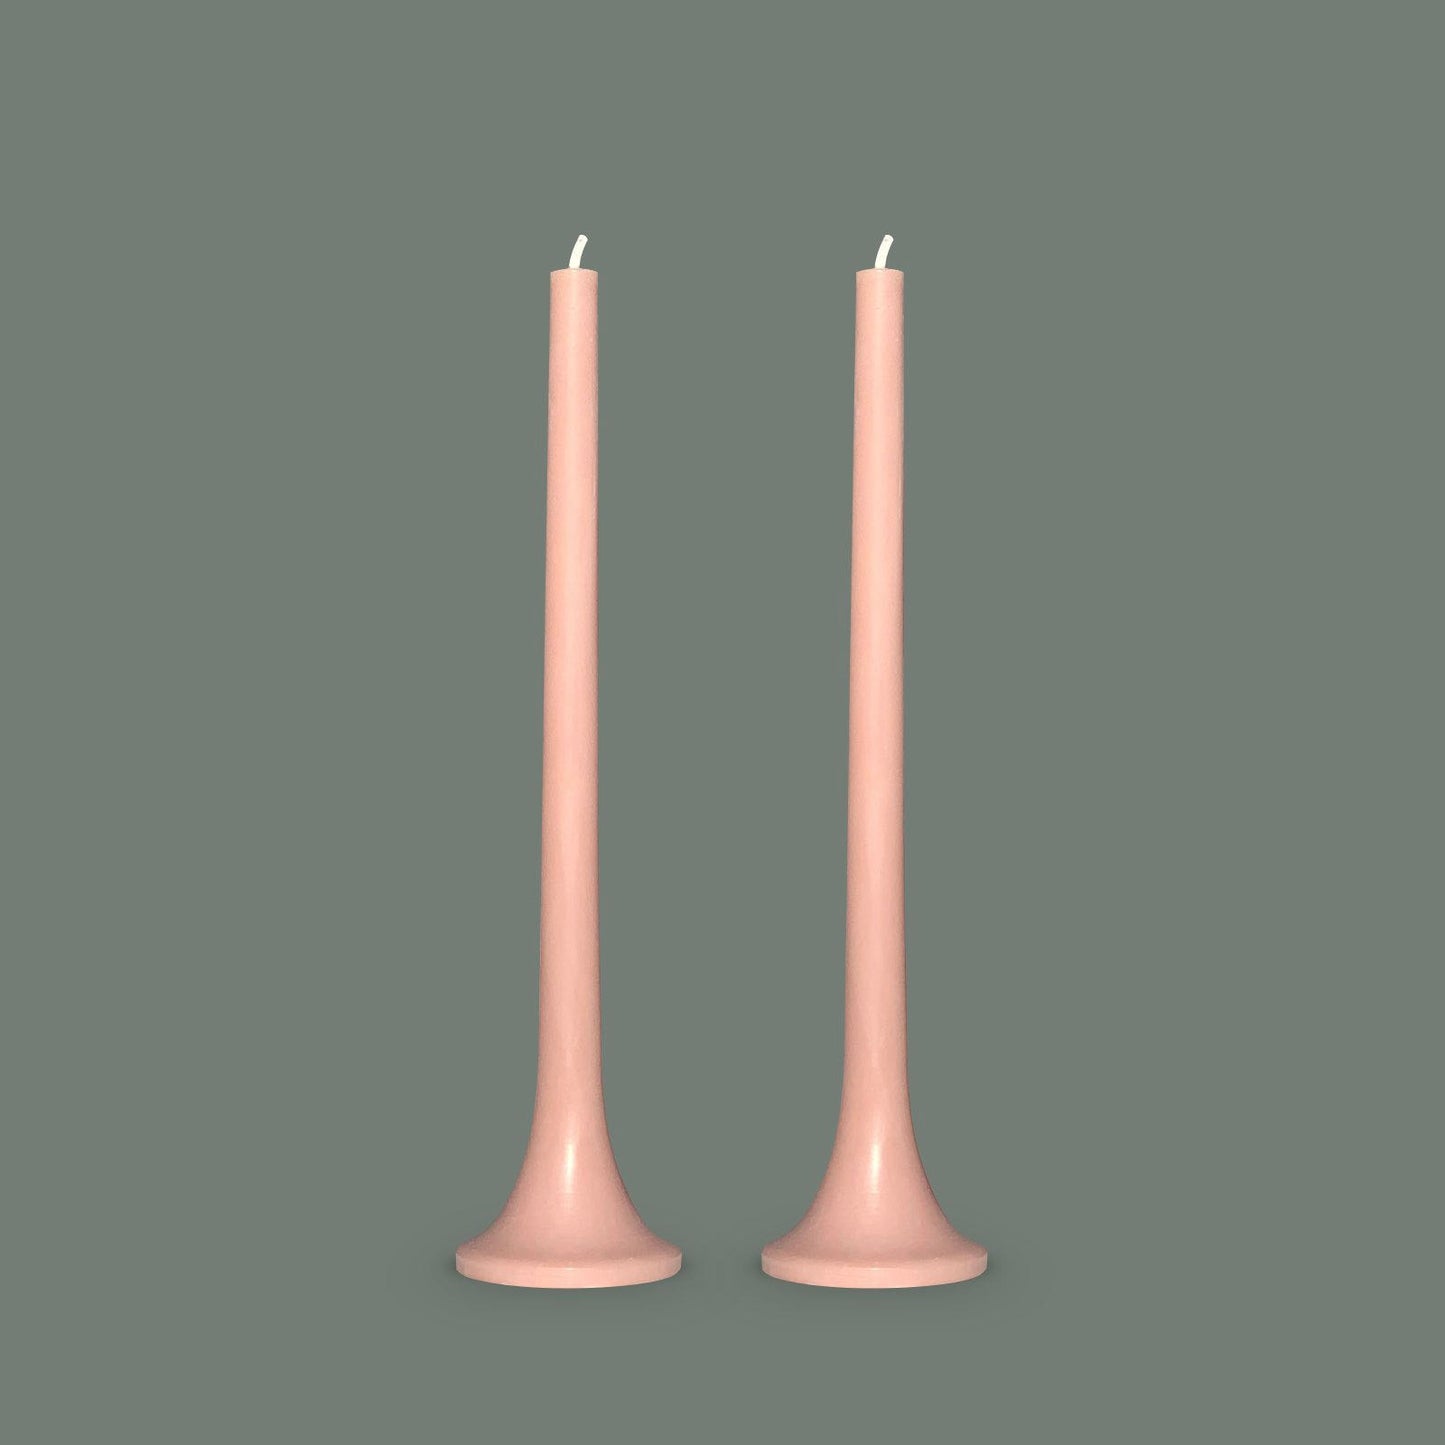 Tall clay candles